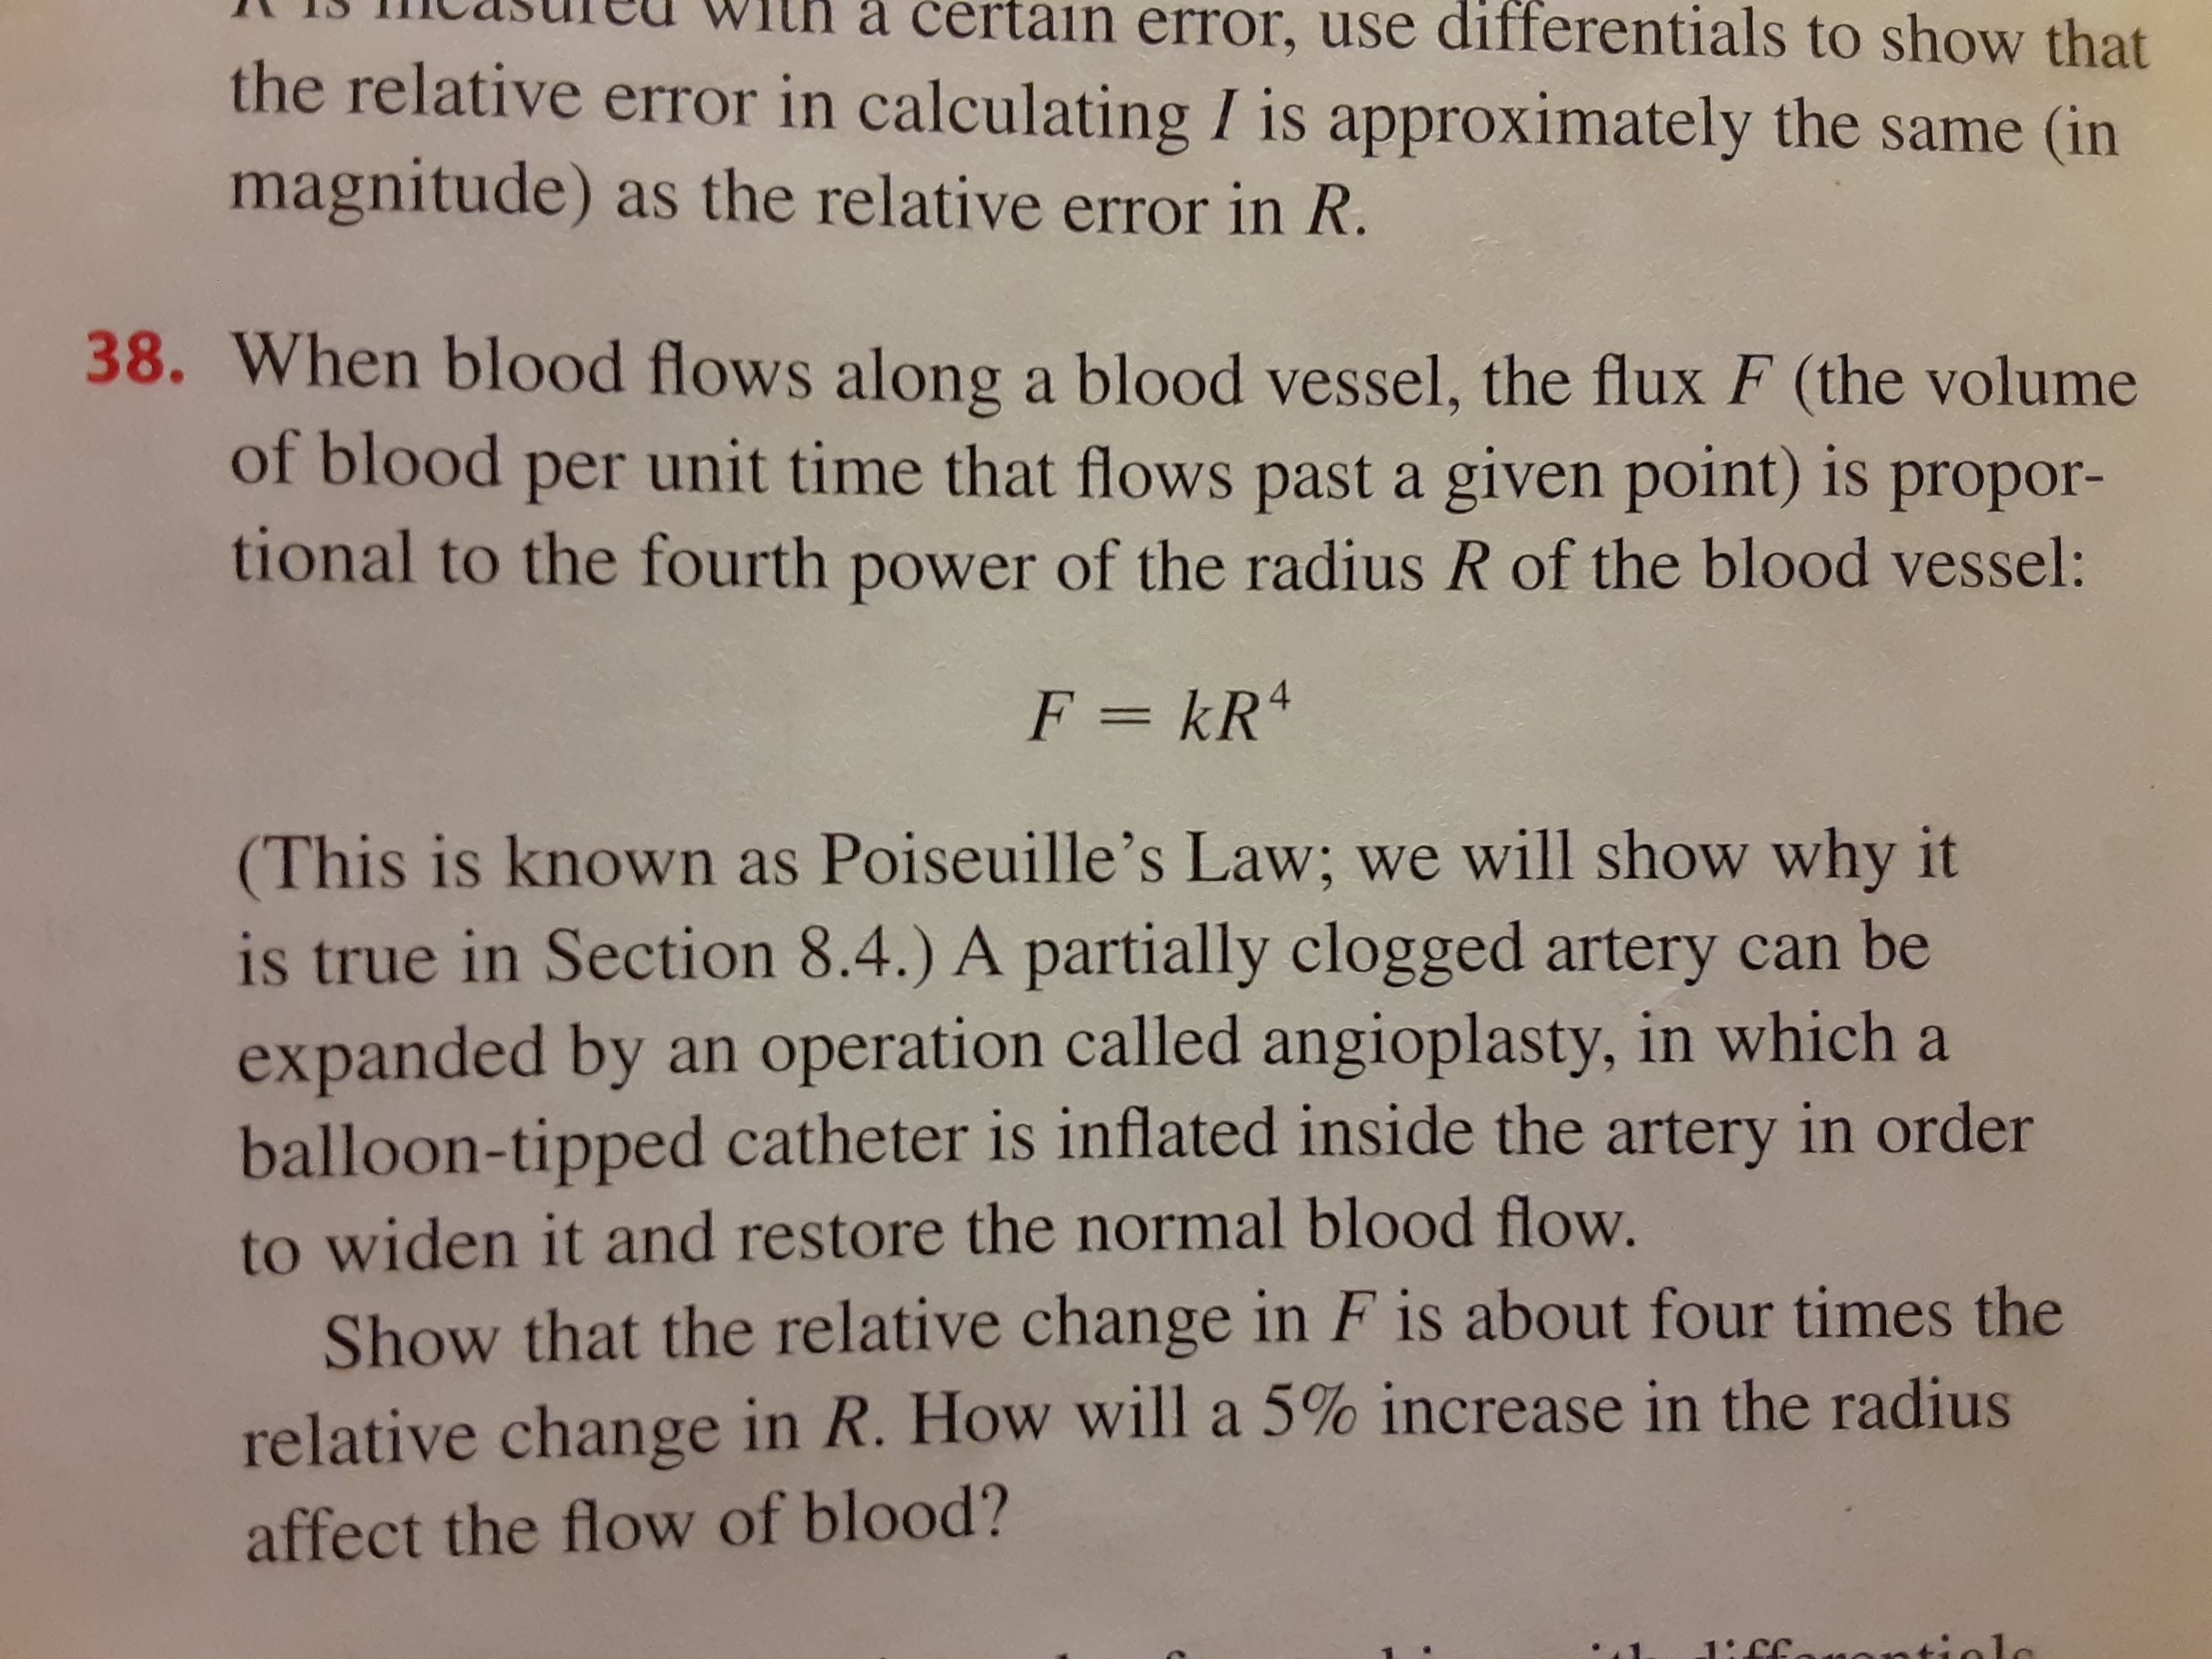 When blood flows along a blood vessel, the flux F (the volume
of blood per unit time that flows past a given point) is propor-
tional to the fourth power of the radius R of the blood vessel:
F = kR4
%3D
(This is known as Poiseuille's Law; we will show why it
is true in Section 8.4.) A partially clogged artery can be
expanded by an operation called angioplasty, in which a
balloon-tipped catheter is inflated inside the artery in order
to widen it and restore the normal blood flow.
